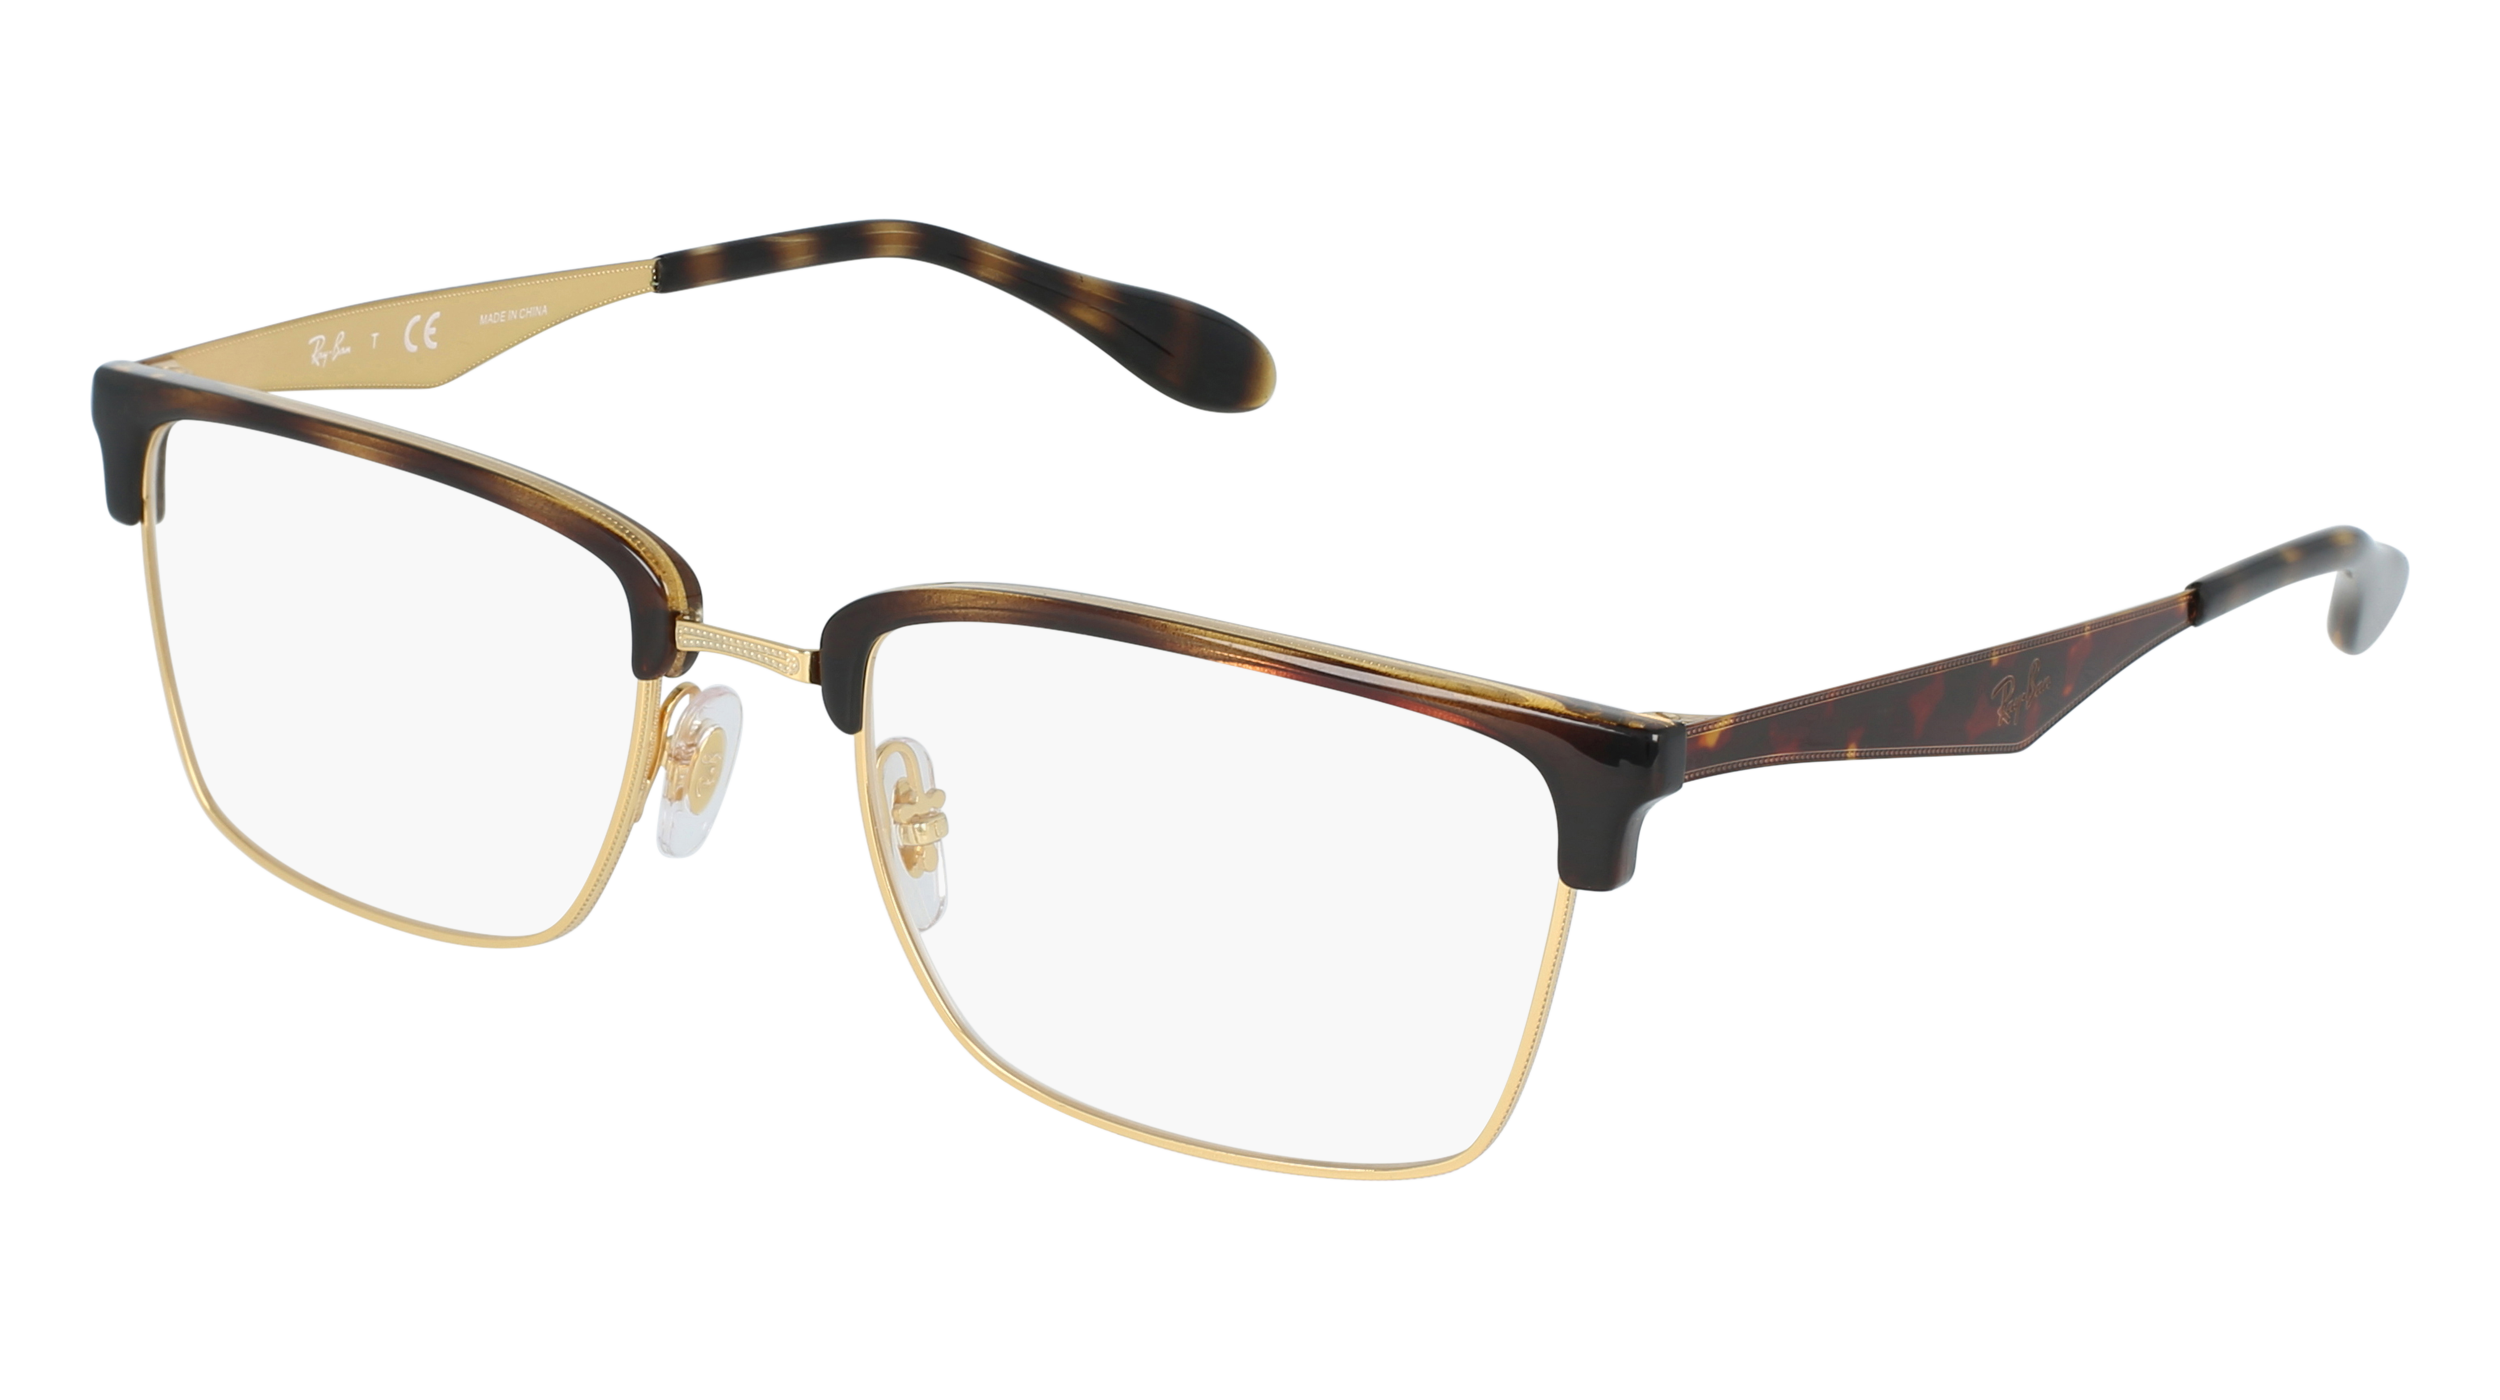 jcpenney ray ban eyeglasses